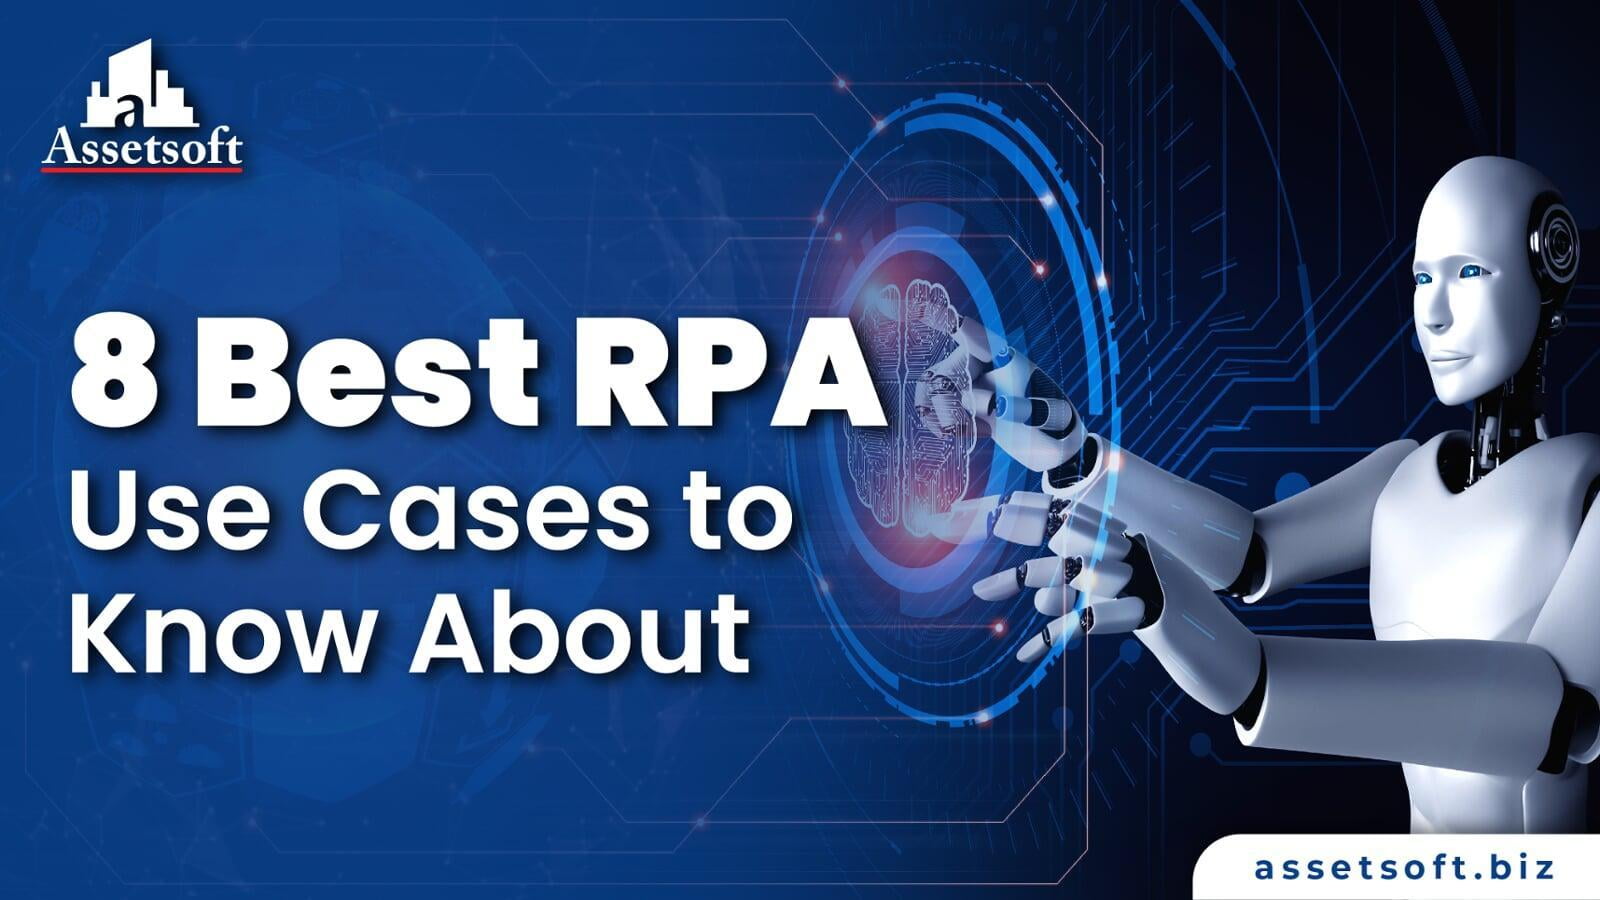 8 Best RPA Use Cases - including Property Managment - to Know About 